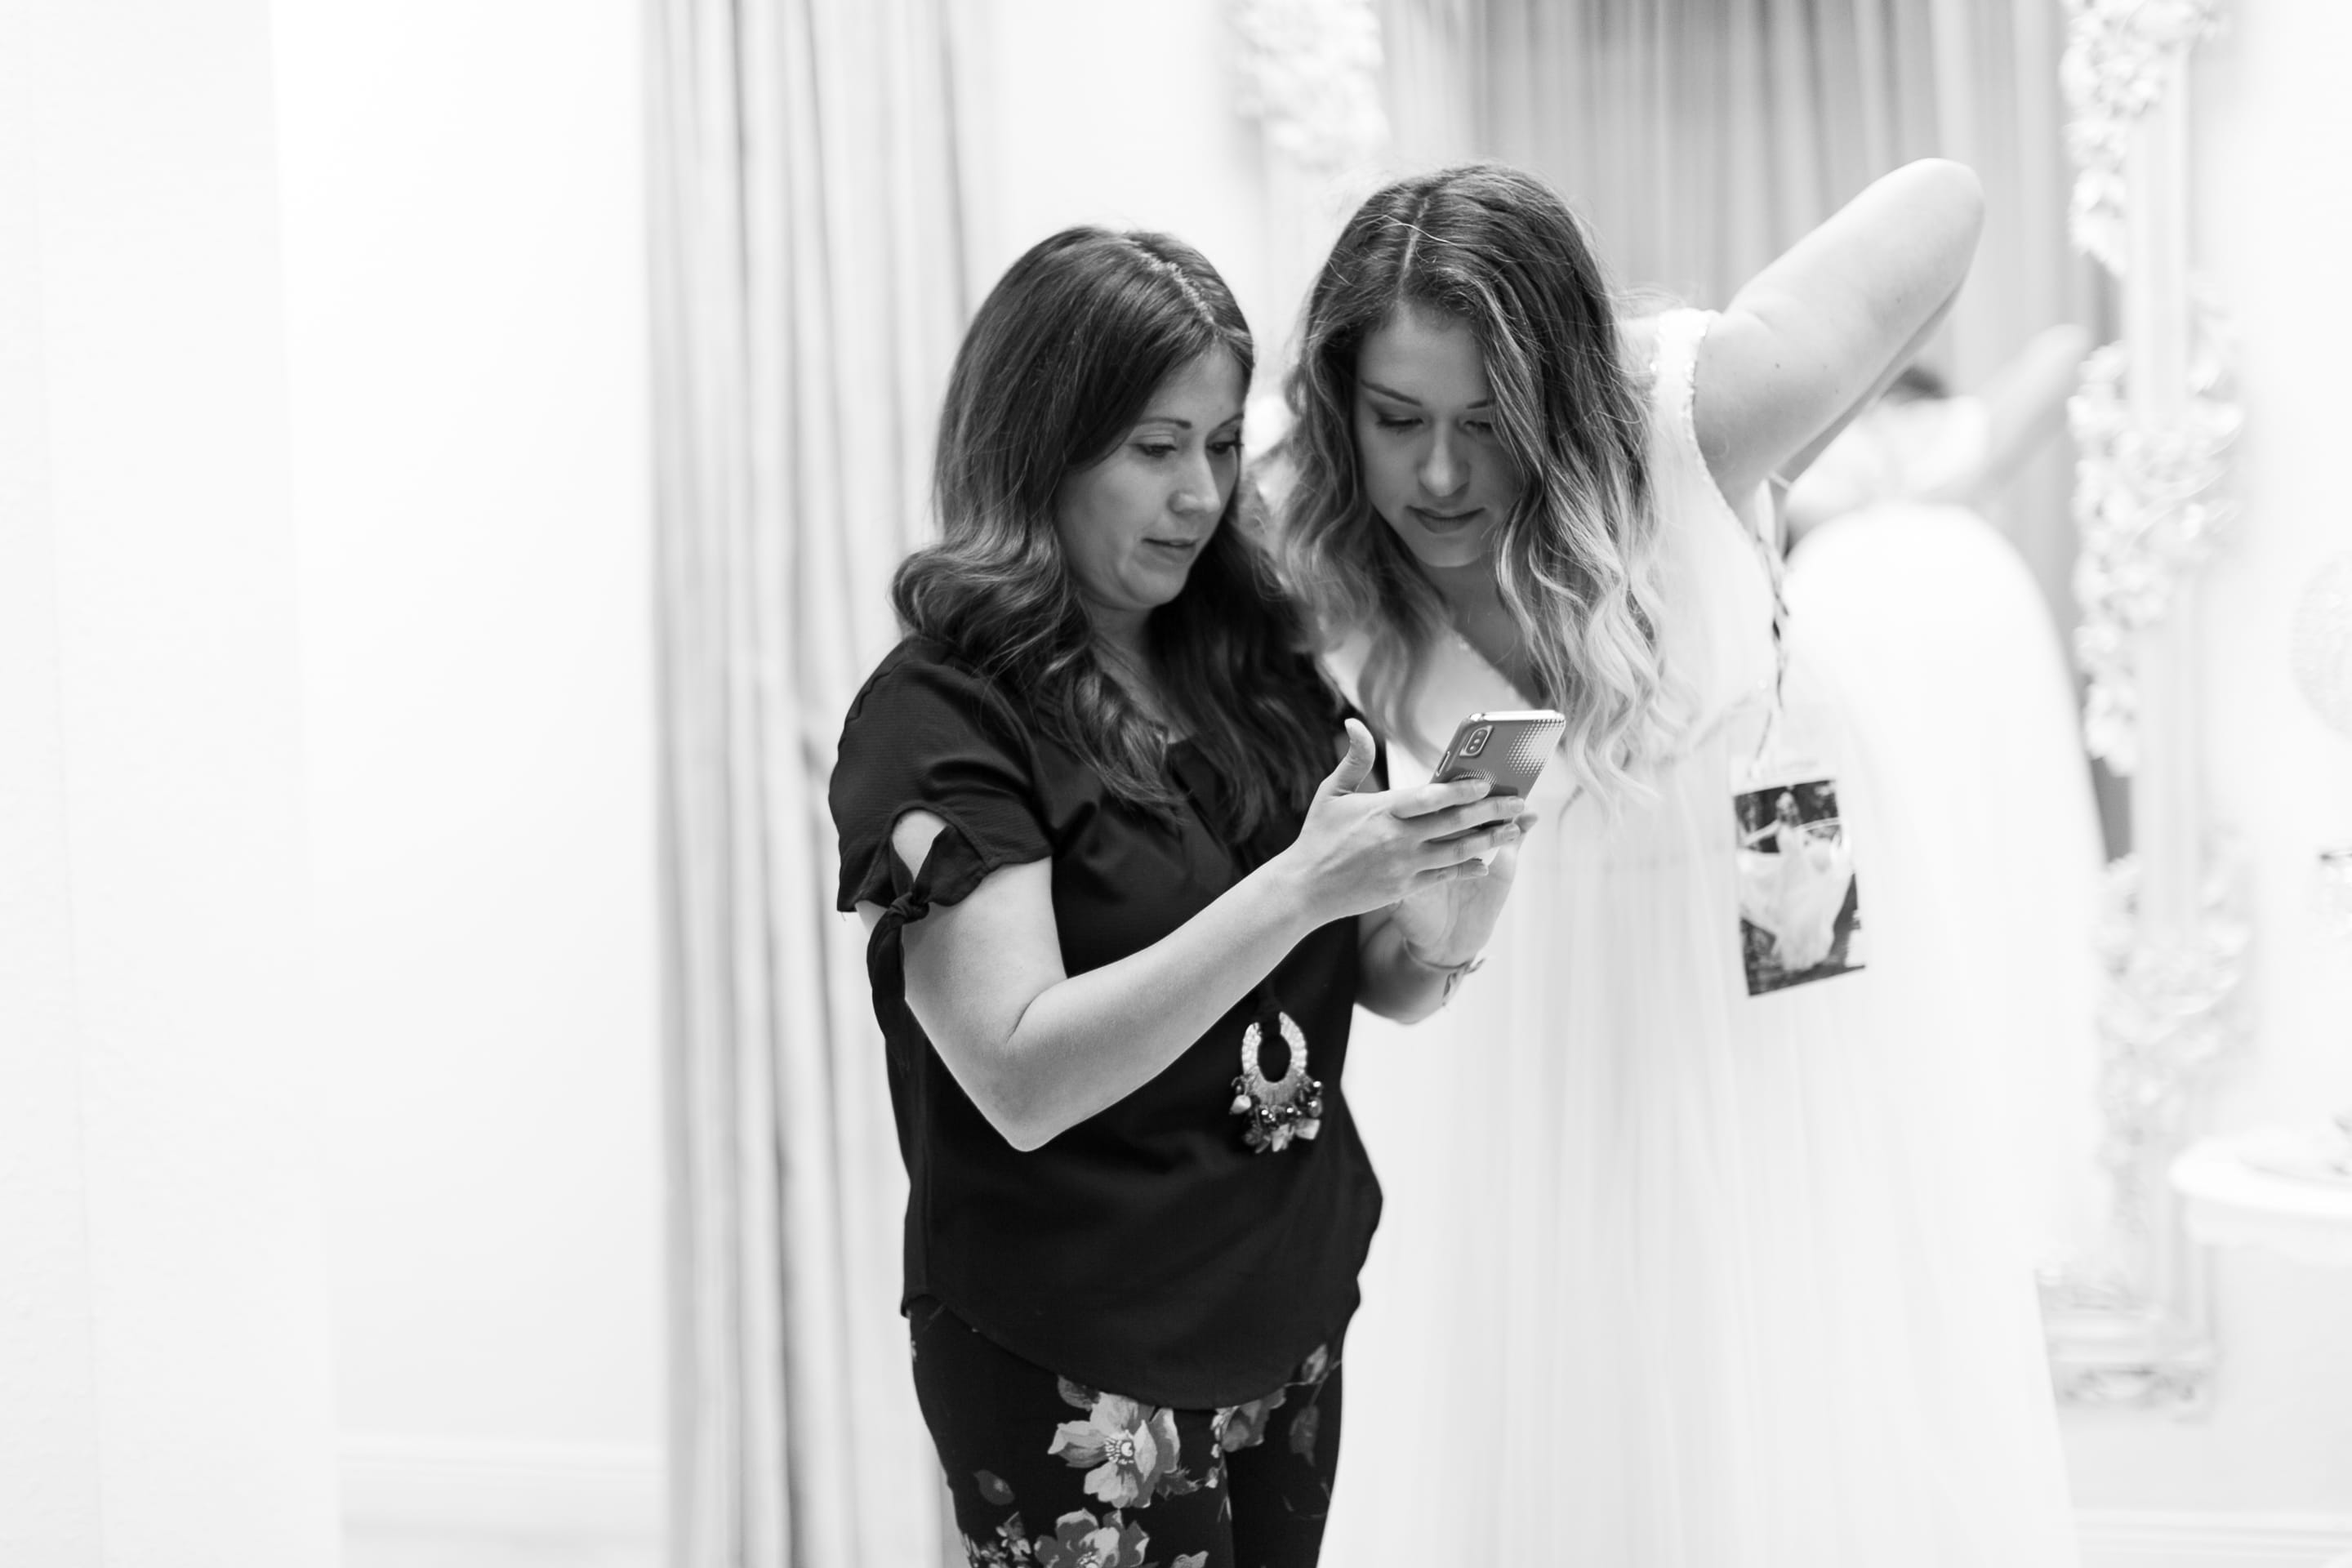 Maid of Honor Etiquette for Wedding Dress Shopping